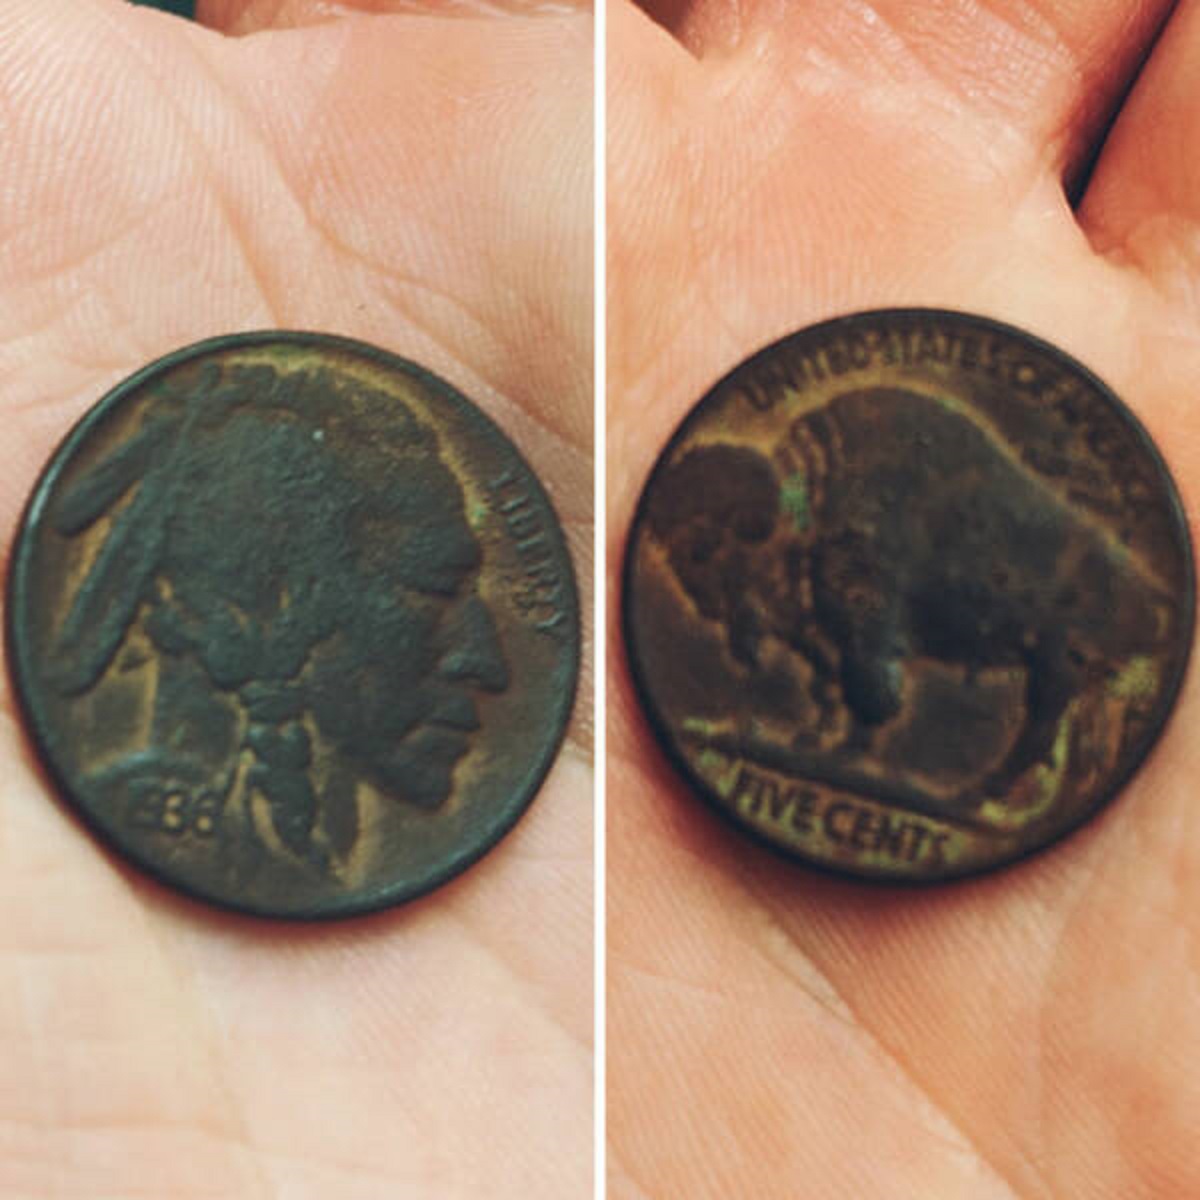 "I Found This American Coin Far Away From Its Country, In A Quiet Field While Metal Detecting In Scotland"